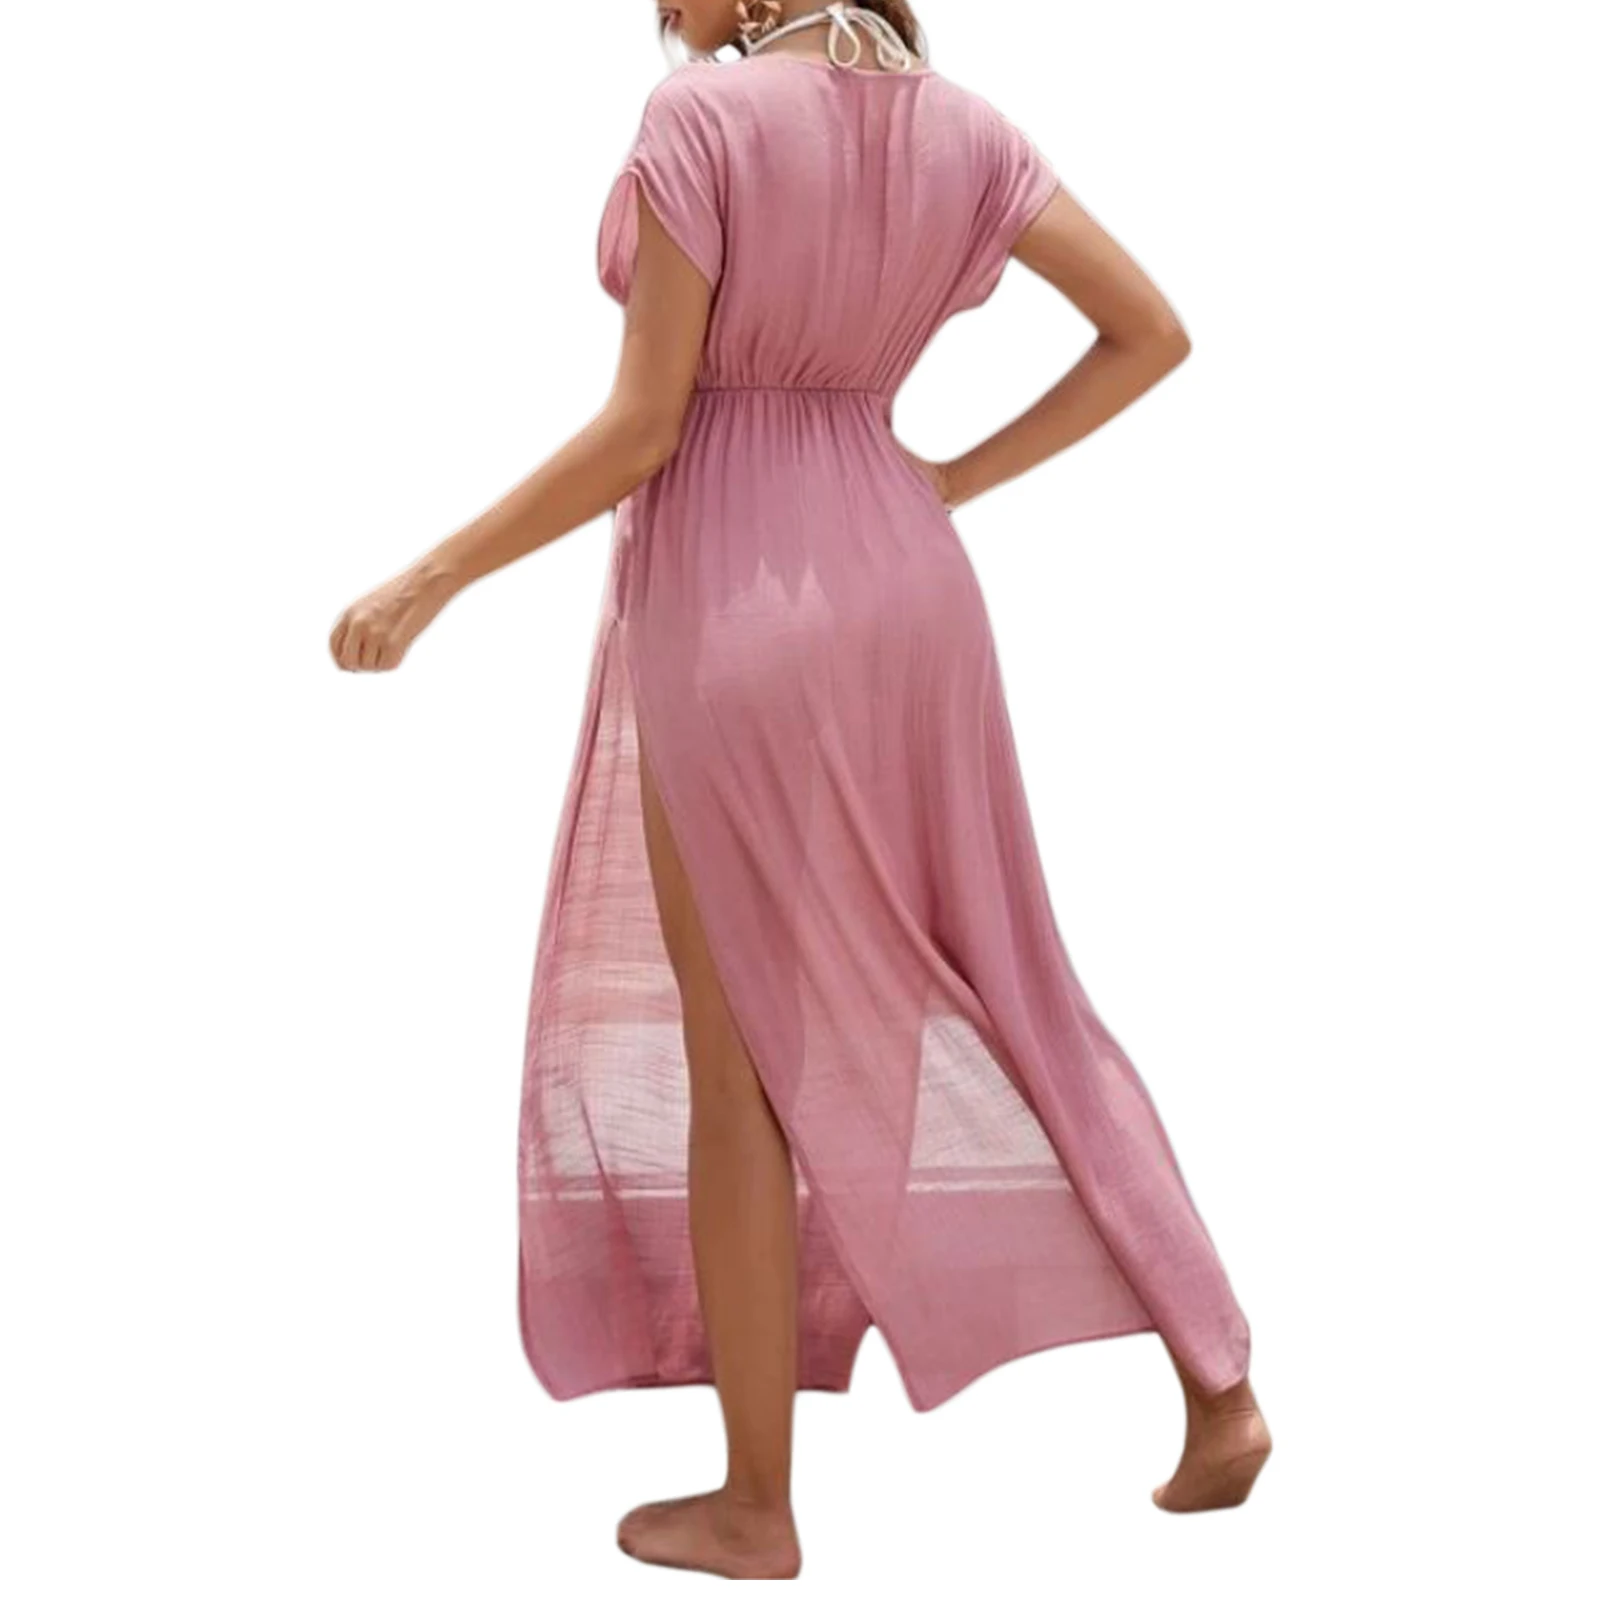 bathing suit skirt cover up Women Clothing Cover Up Dress Solid Color Short Sleeve Round Neck Slit Drawstring Waist Sheer Dress Beach Bikini Smock shein bathing suit cover ups